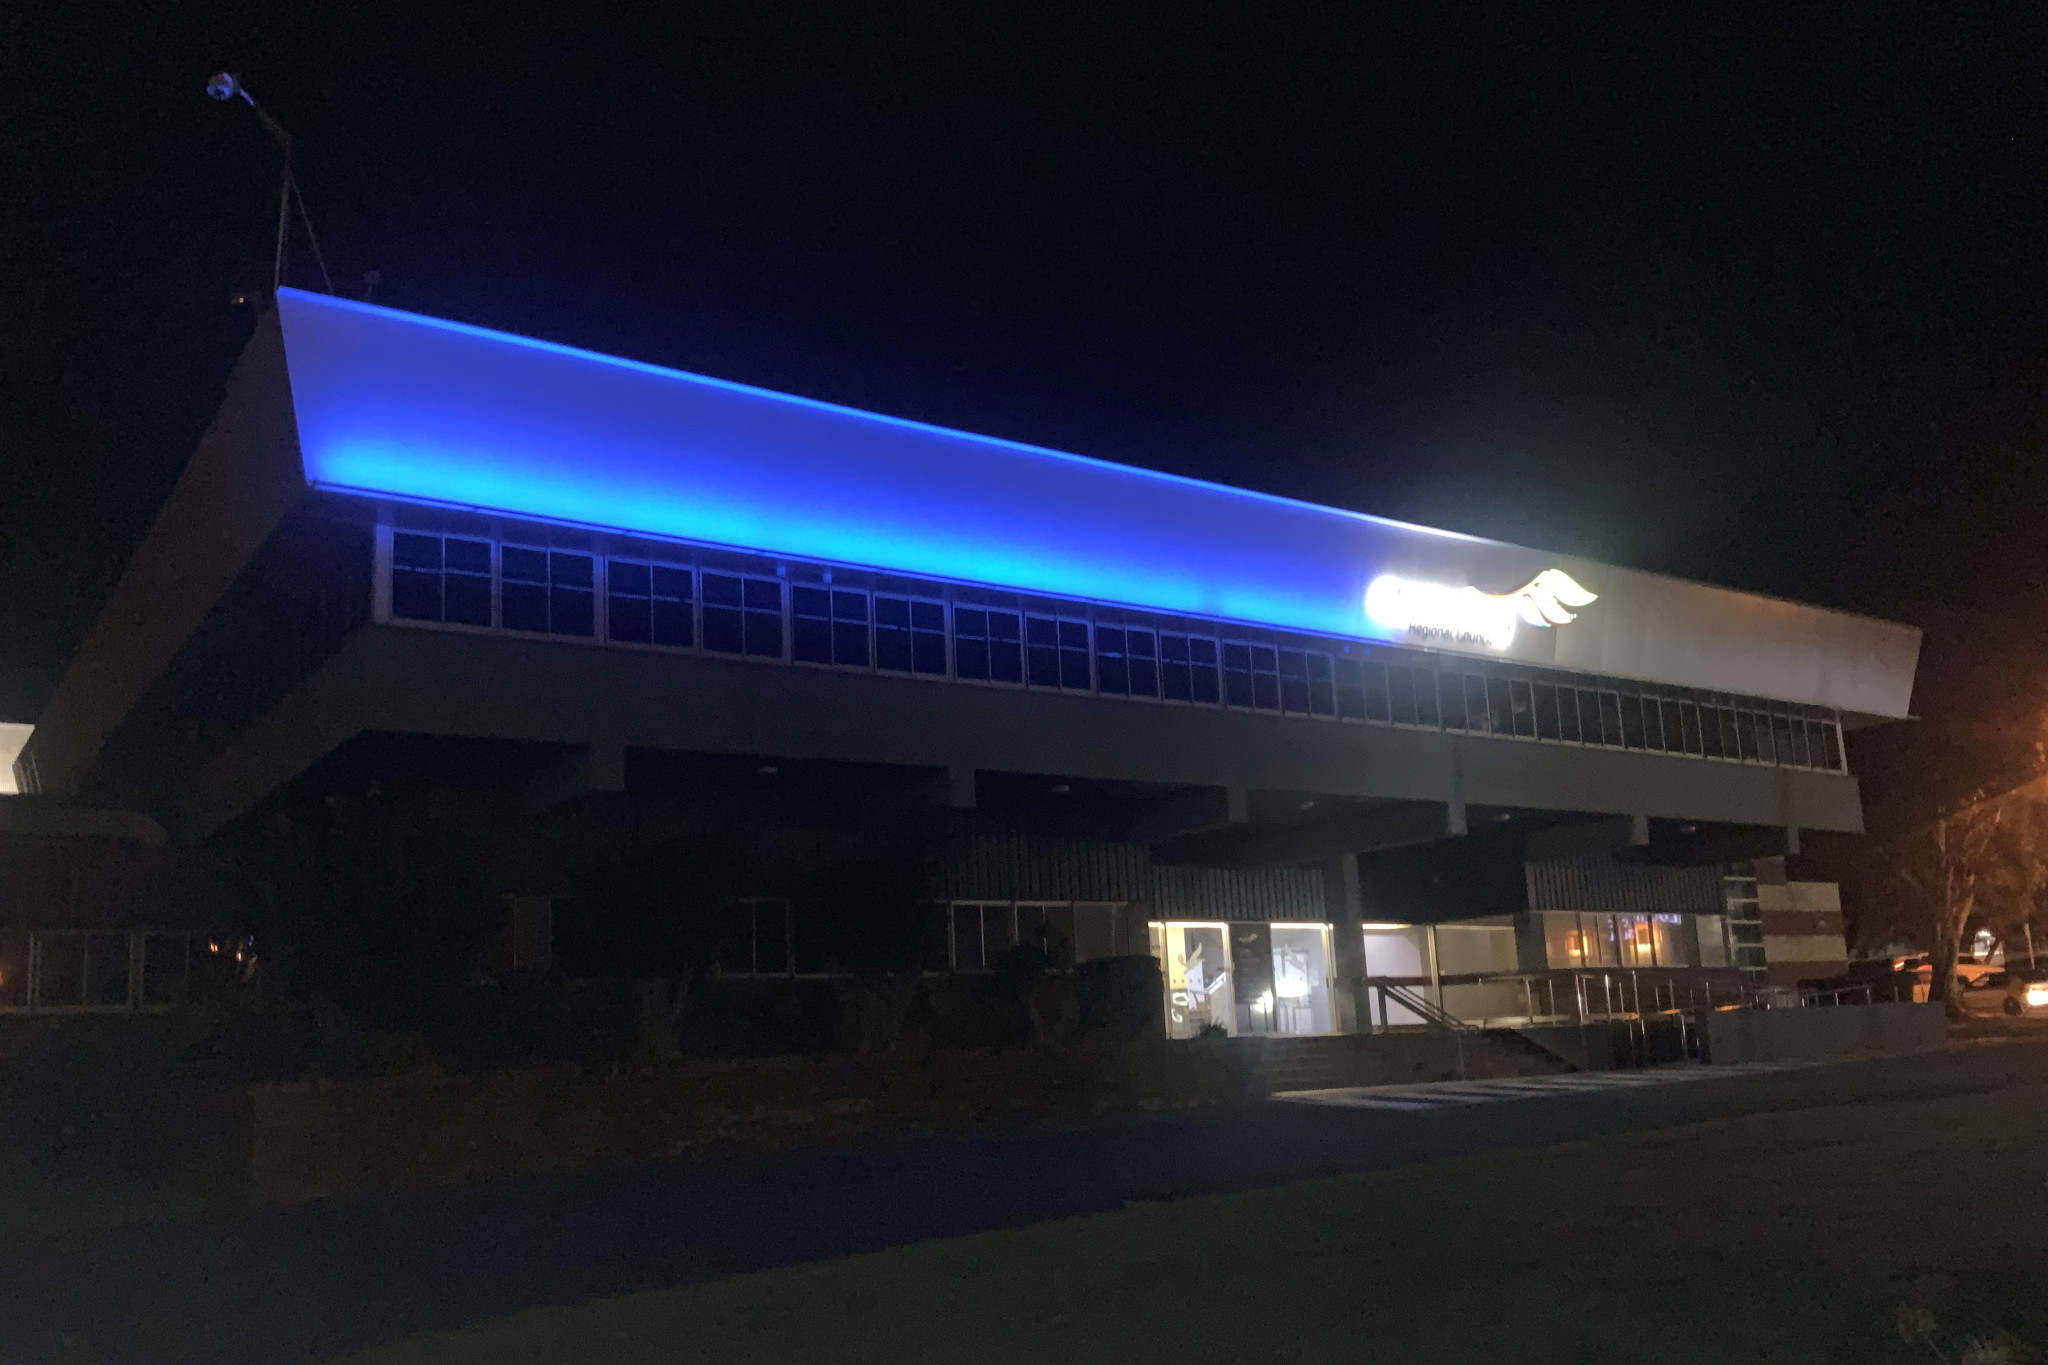 Council buildings turn blue for a worthy cause - feature photo